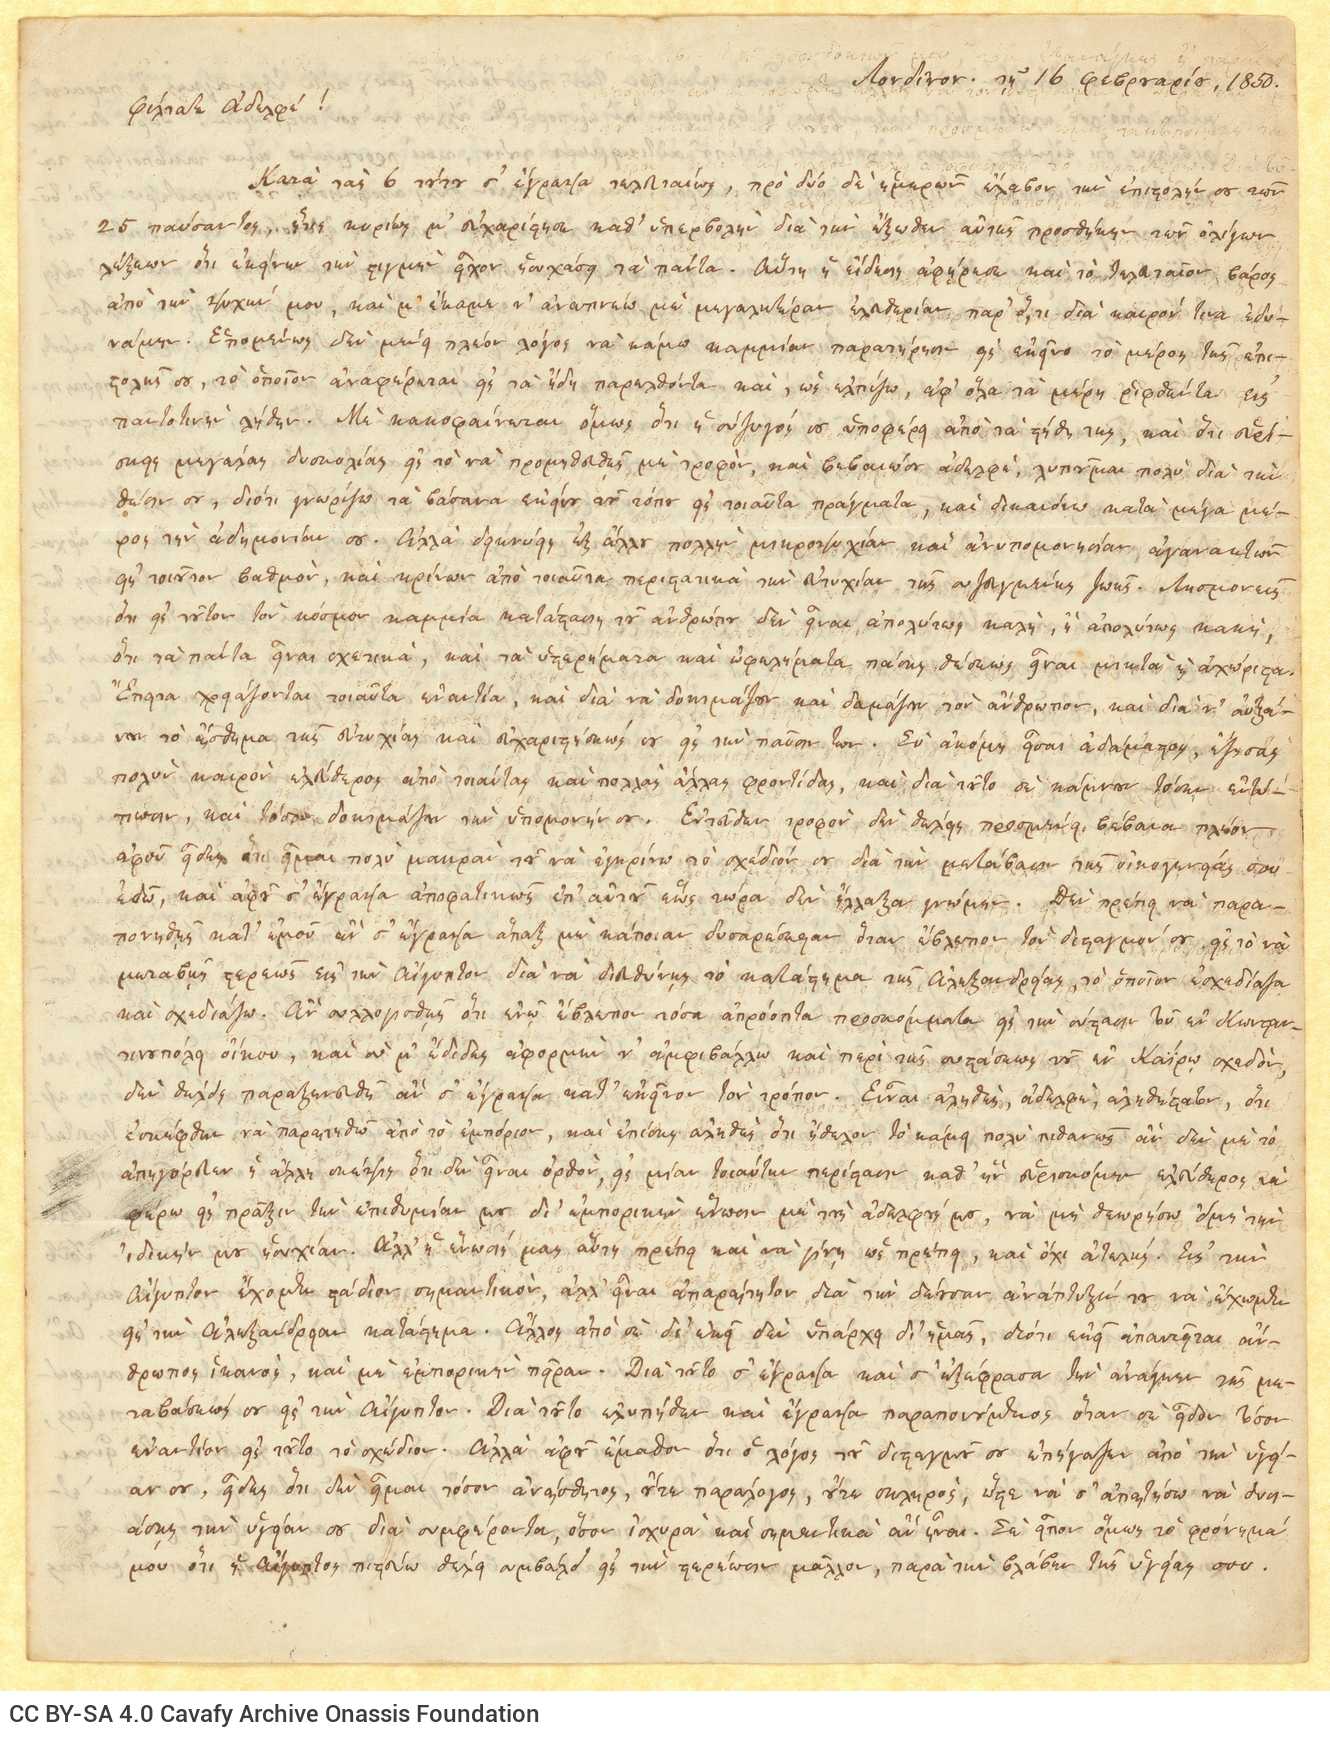 Handwritten letter by George Cavafy from England to his brother, Peter John, in Istanbul. The letter is written on the first 